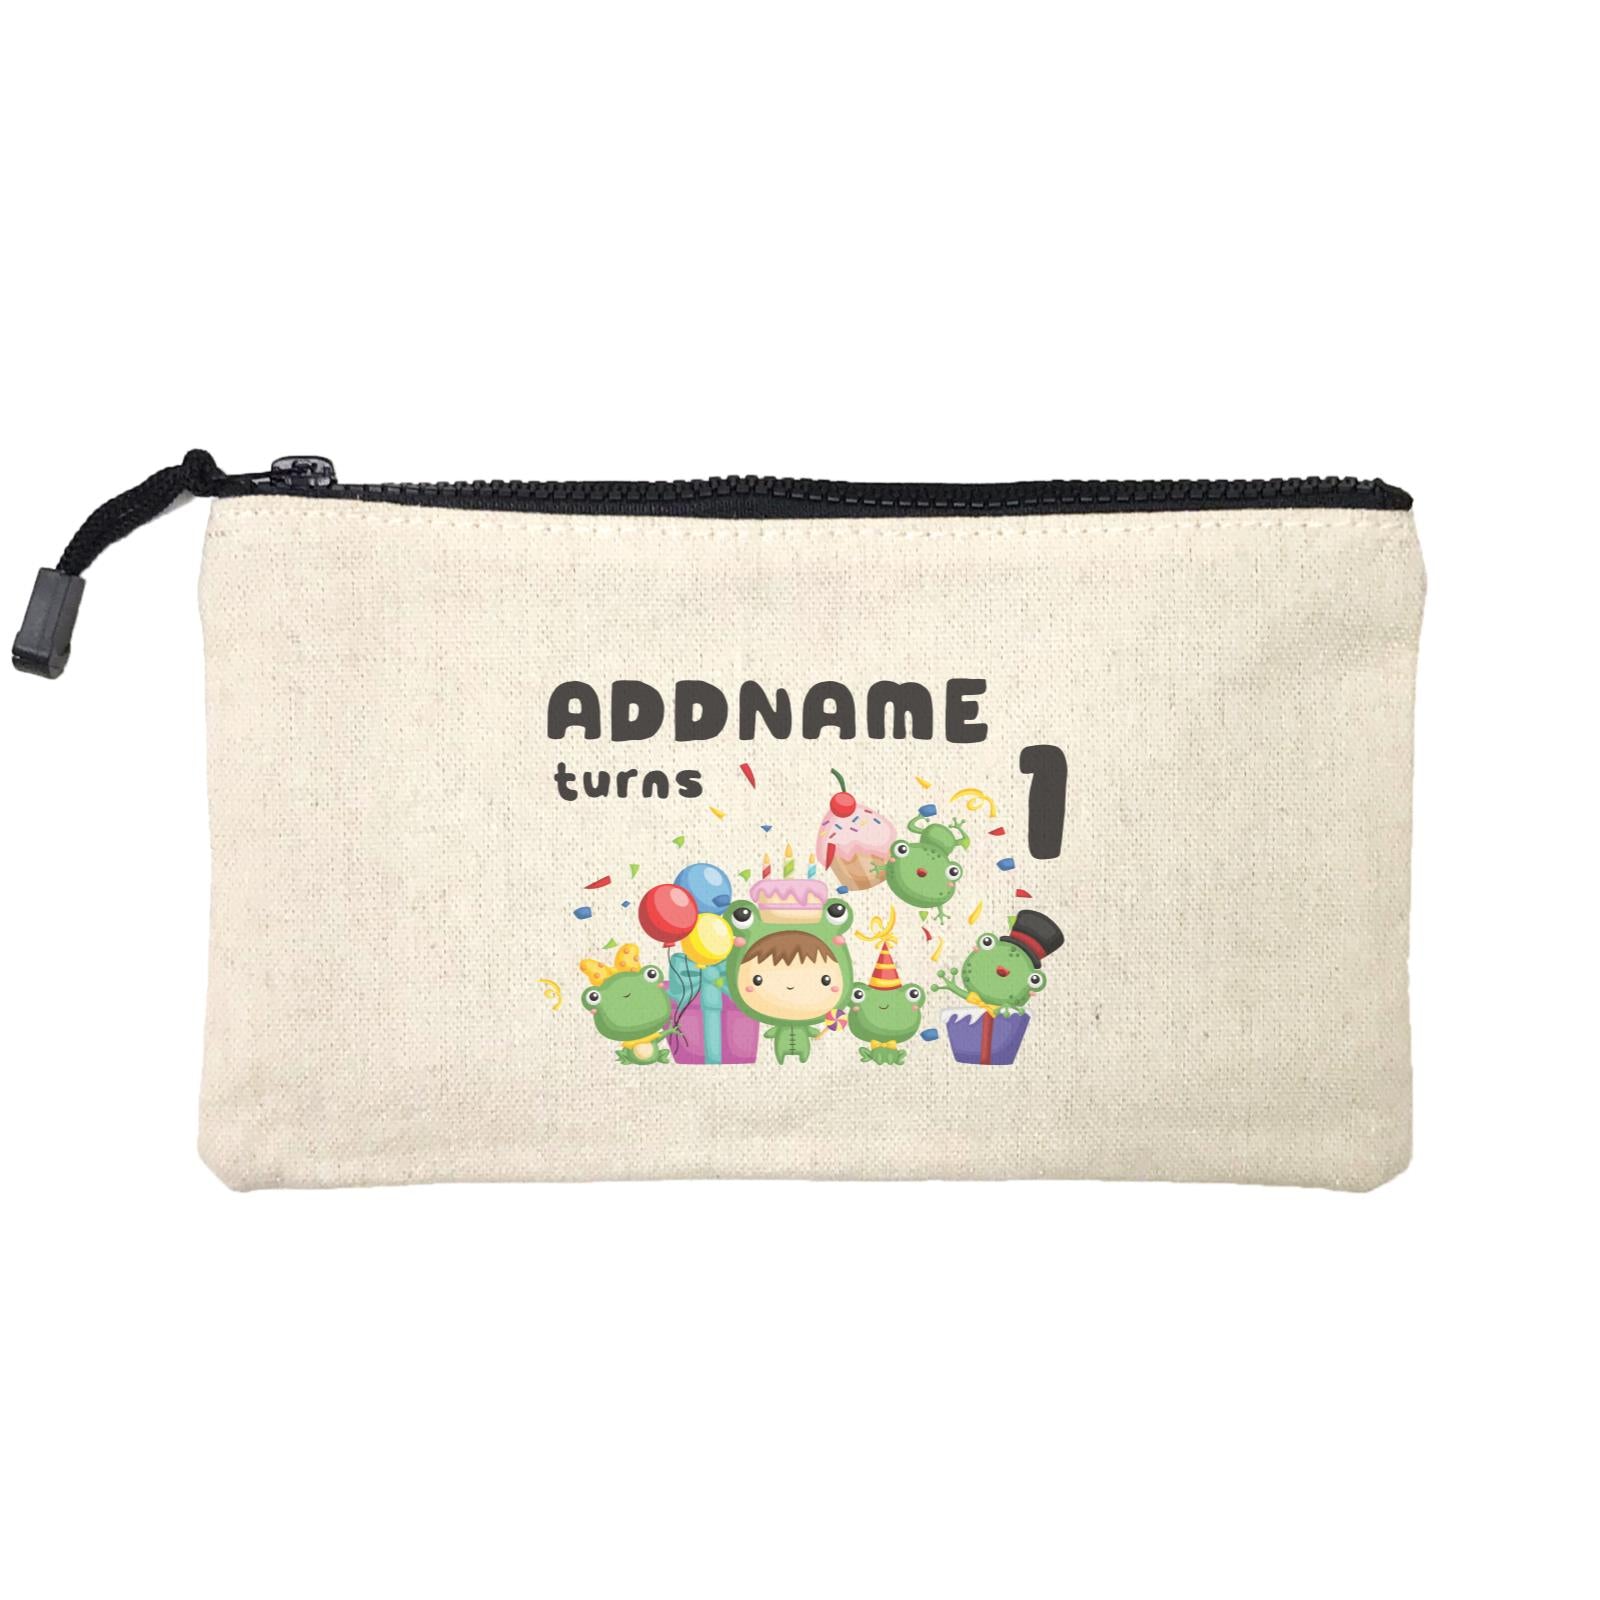 Birthday Frog Happy Frog Group Addname Turns 1 Mini Accessories Stationery Pouch